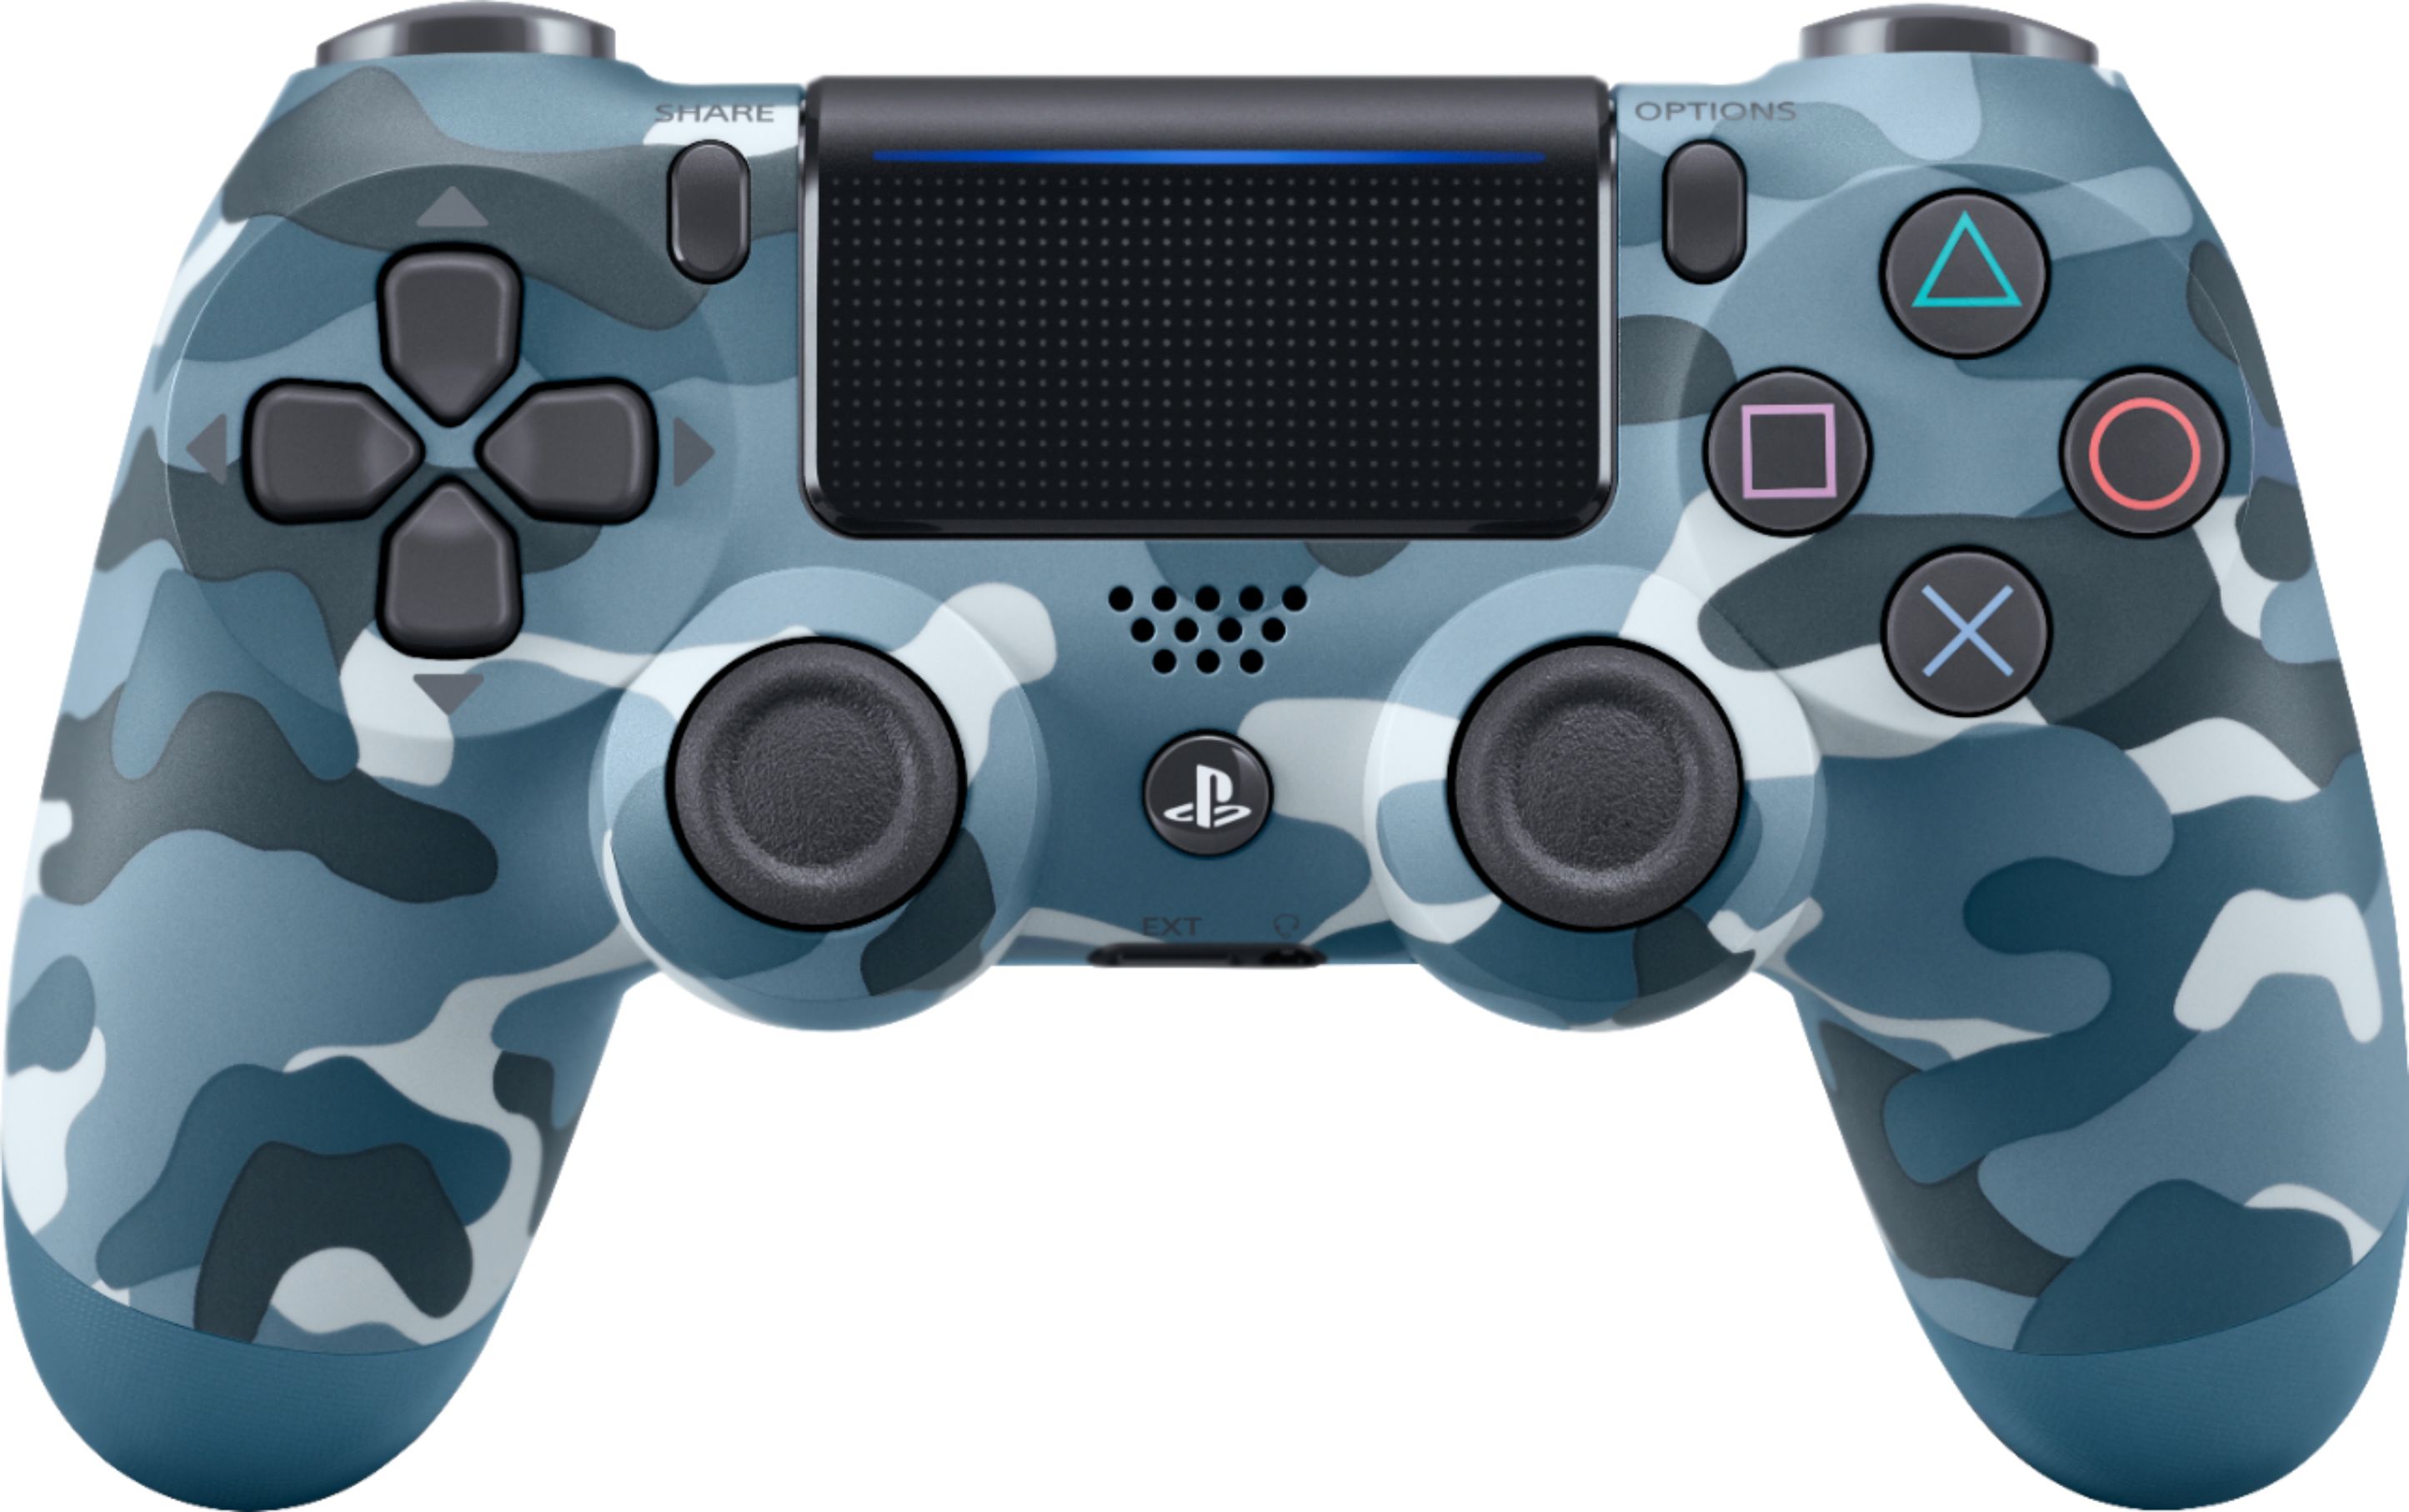 Sony - DualShock 4 Wireless Controller for Sony PlayStation 4 - Blue